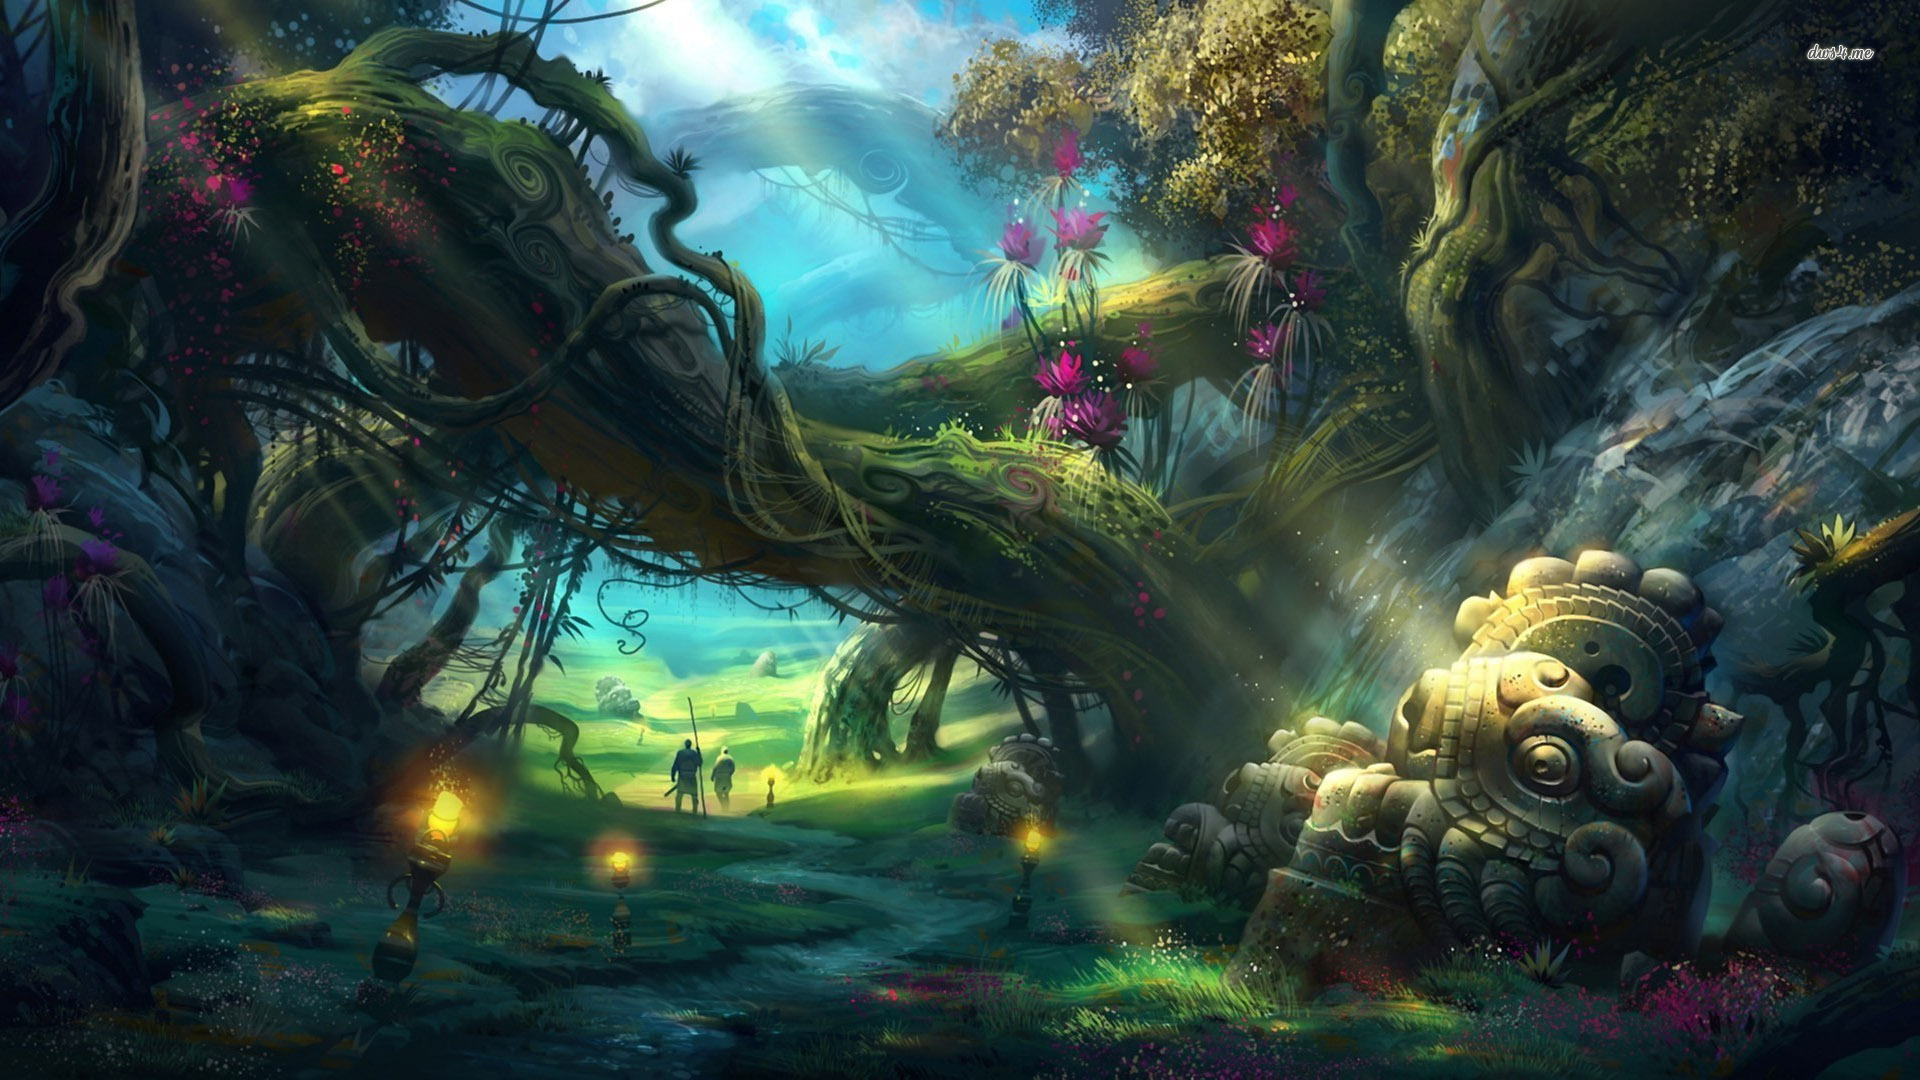 The Enchanted Forest Wallpaper Full HD